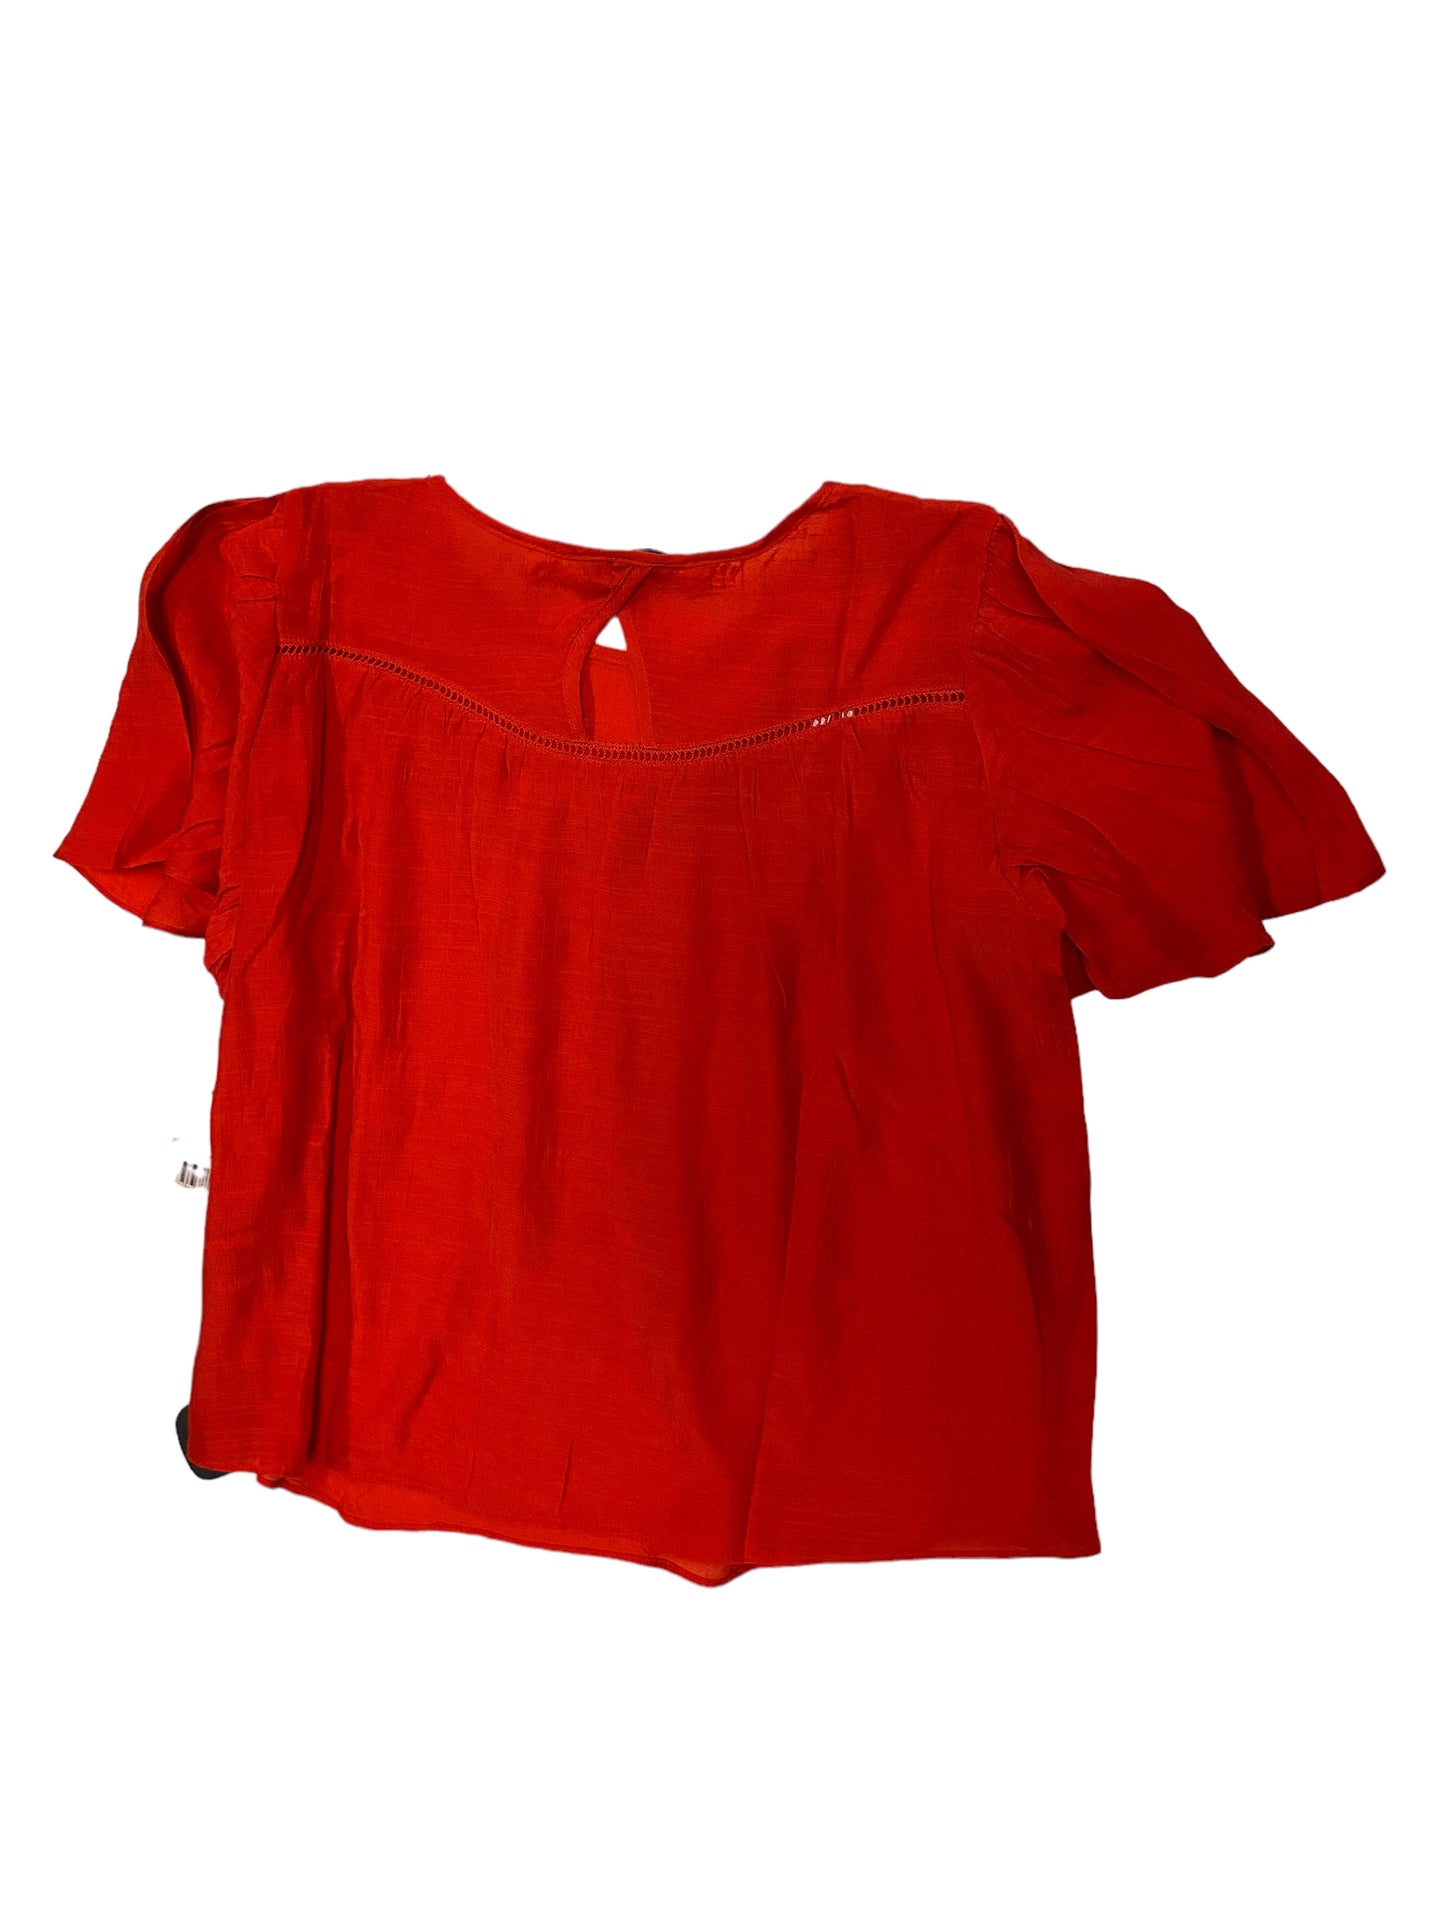 Red Top Short Sleeve Nanette Lepore, Size S